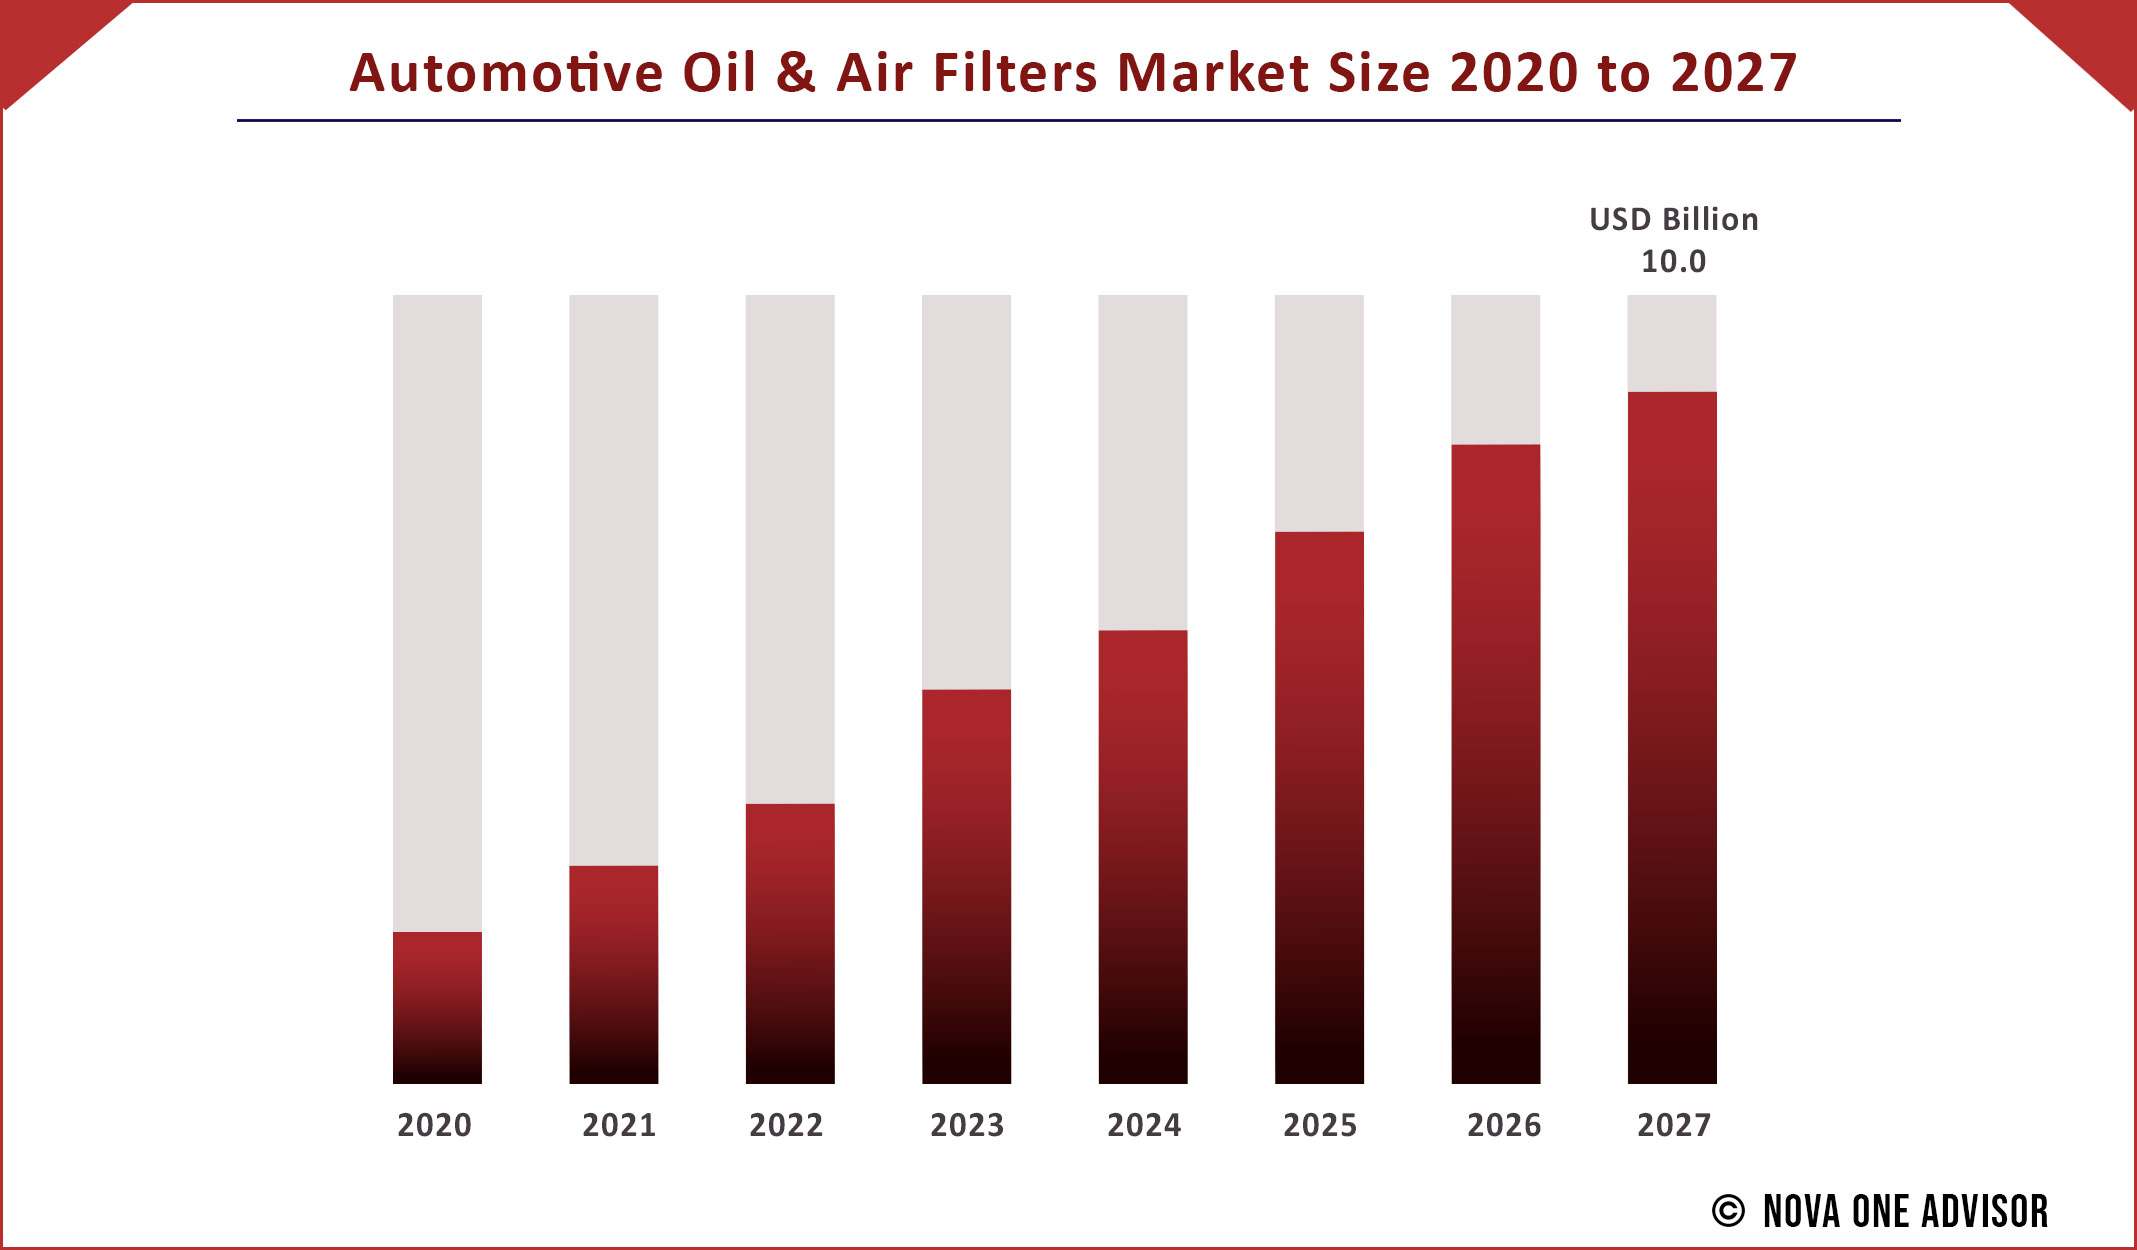 Automotive Oil & Air Filters Market Size 2020 to 2027